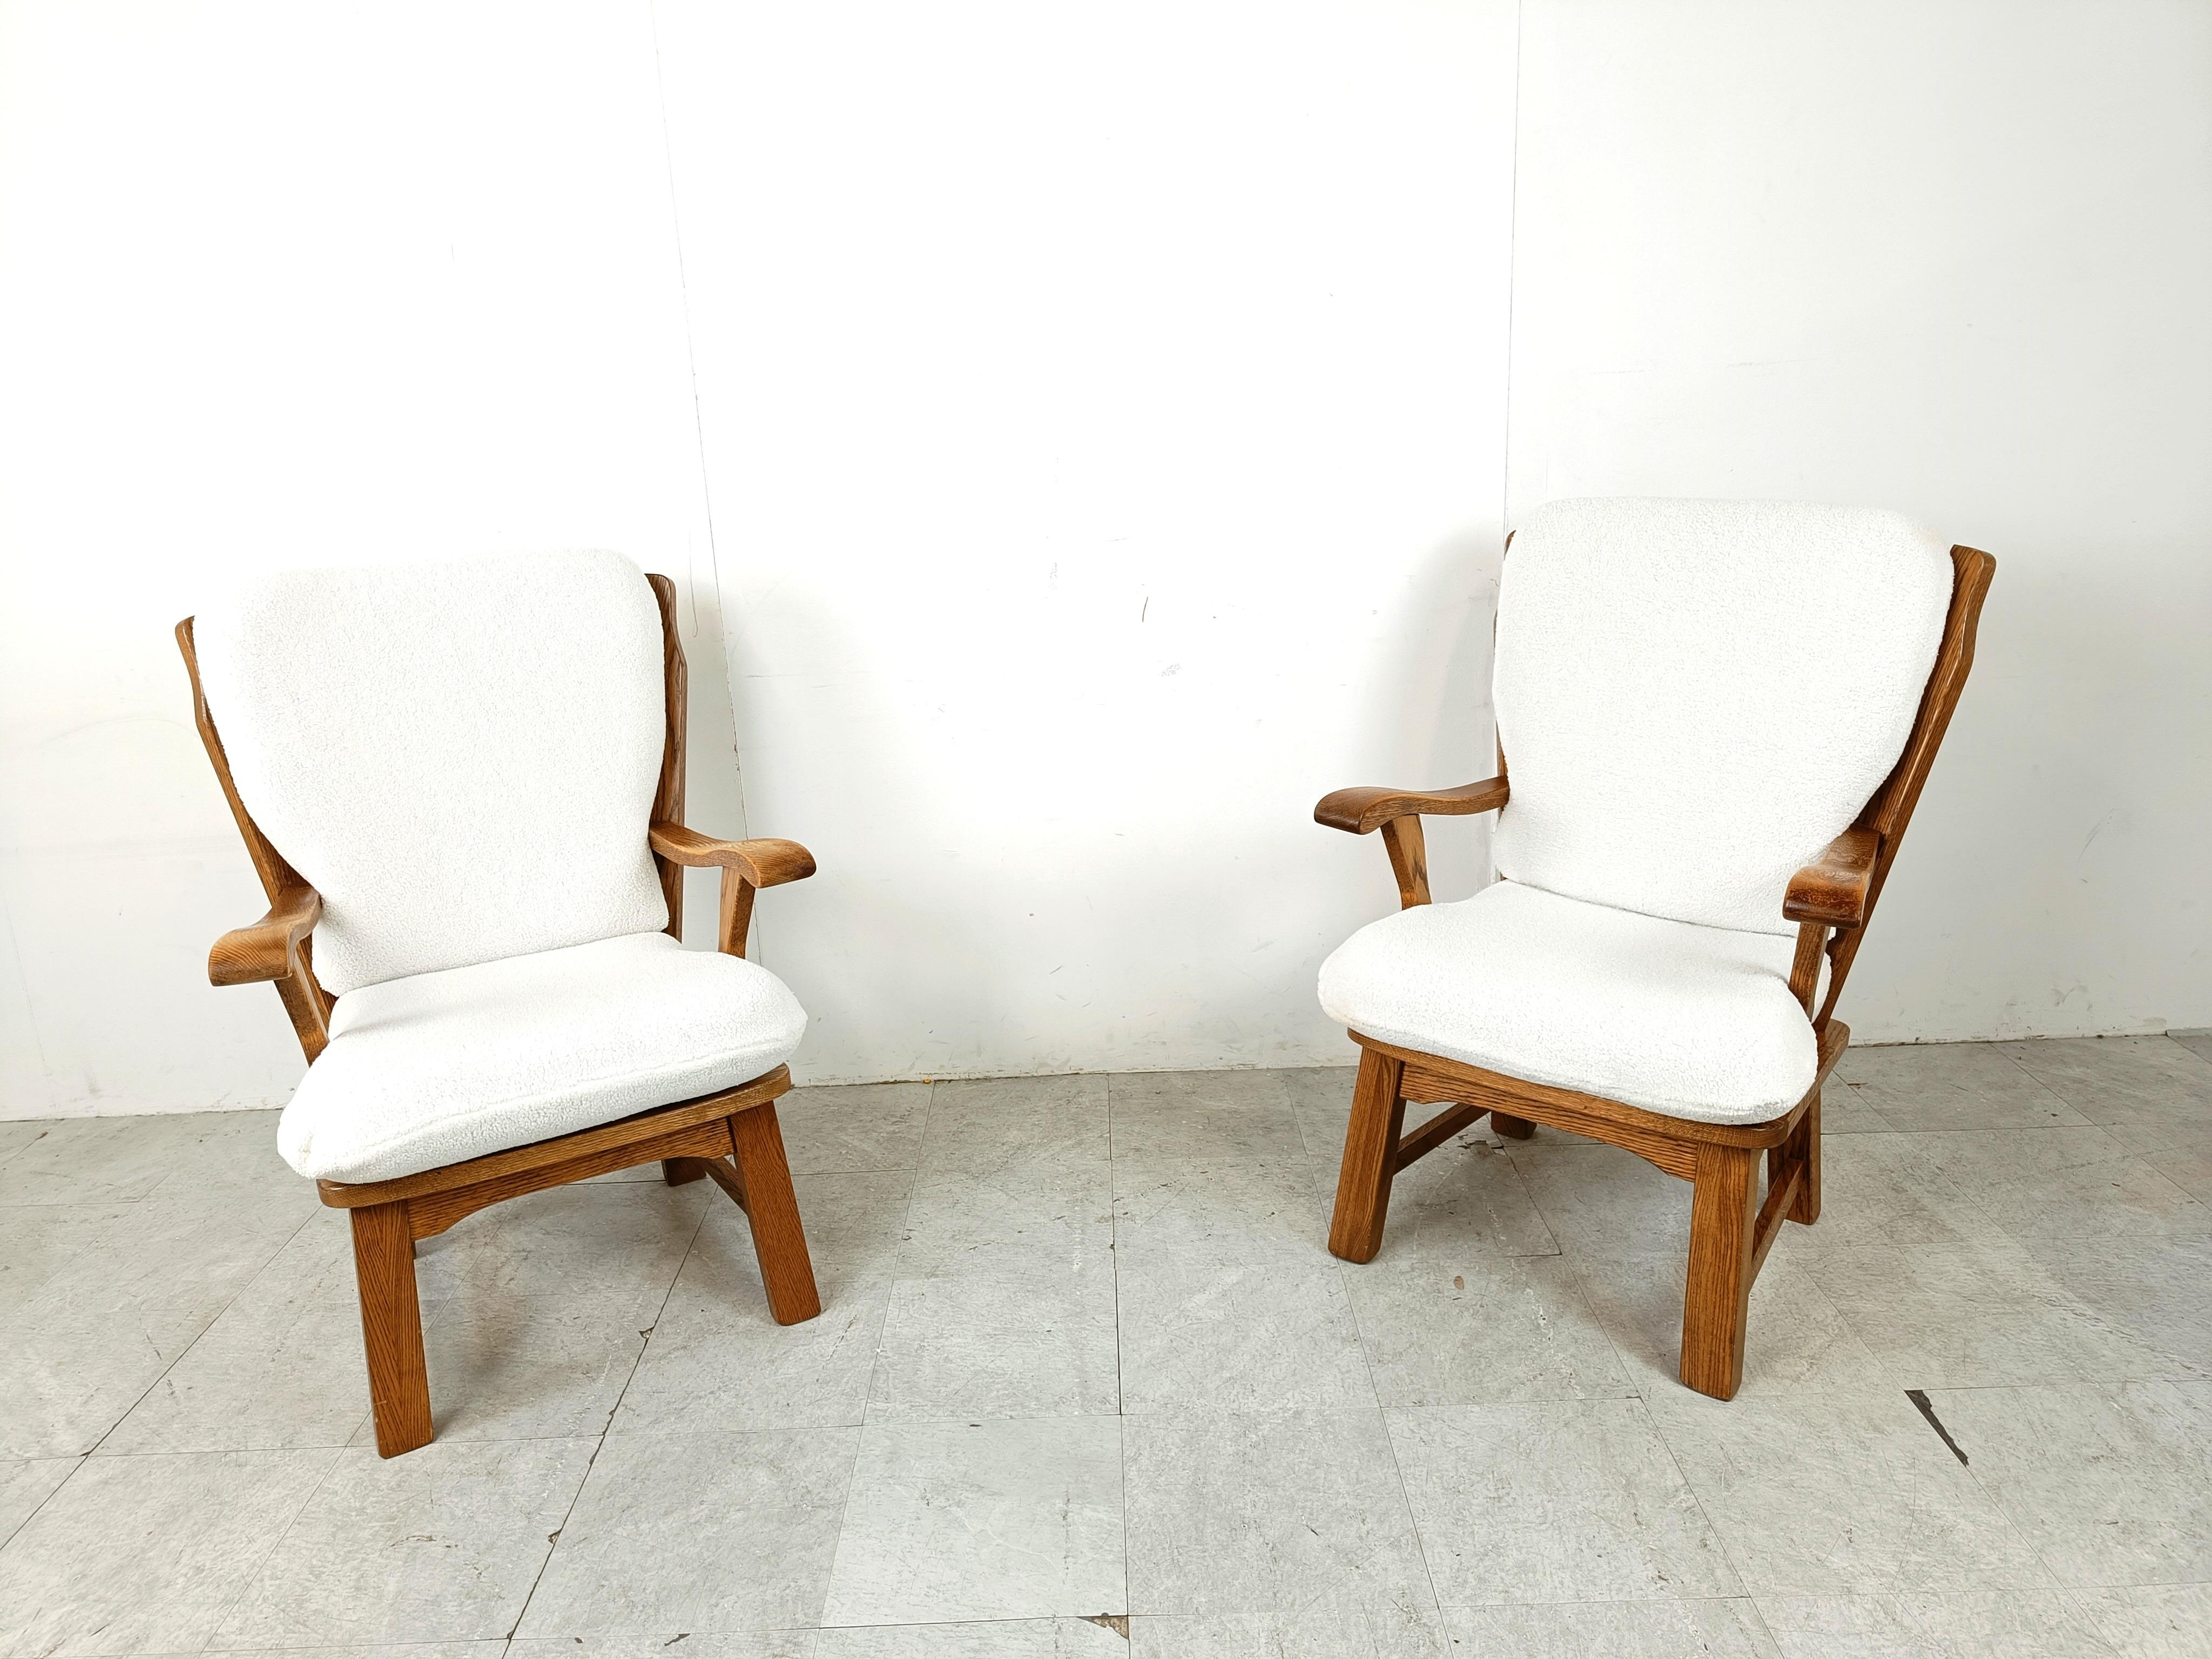 Pair of rustic solid oak armchairs with comfortable and fresh looking reupholstered boucla cushions.

These elegantly shaped wooden chairs add a rustic touch to your interior.

1950s - France

Very good condition

Height: 100cm
Width: 66cm
Depth: